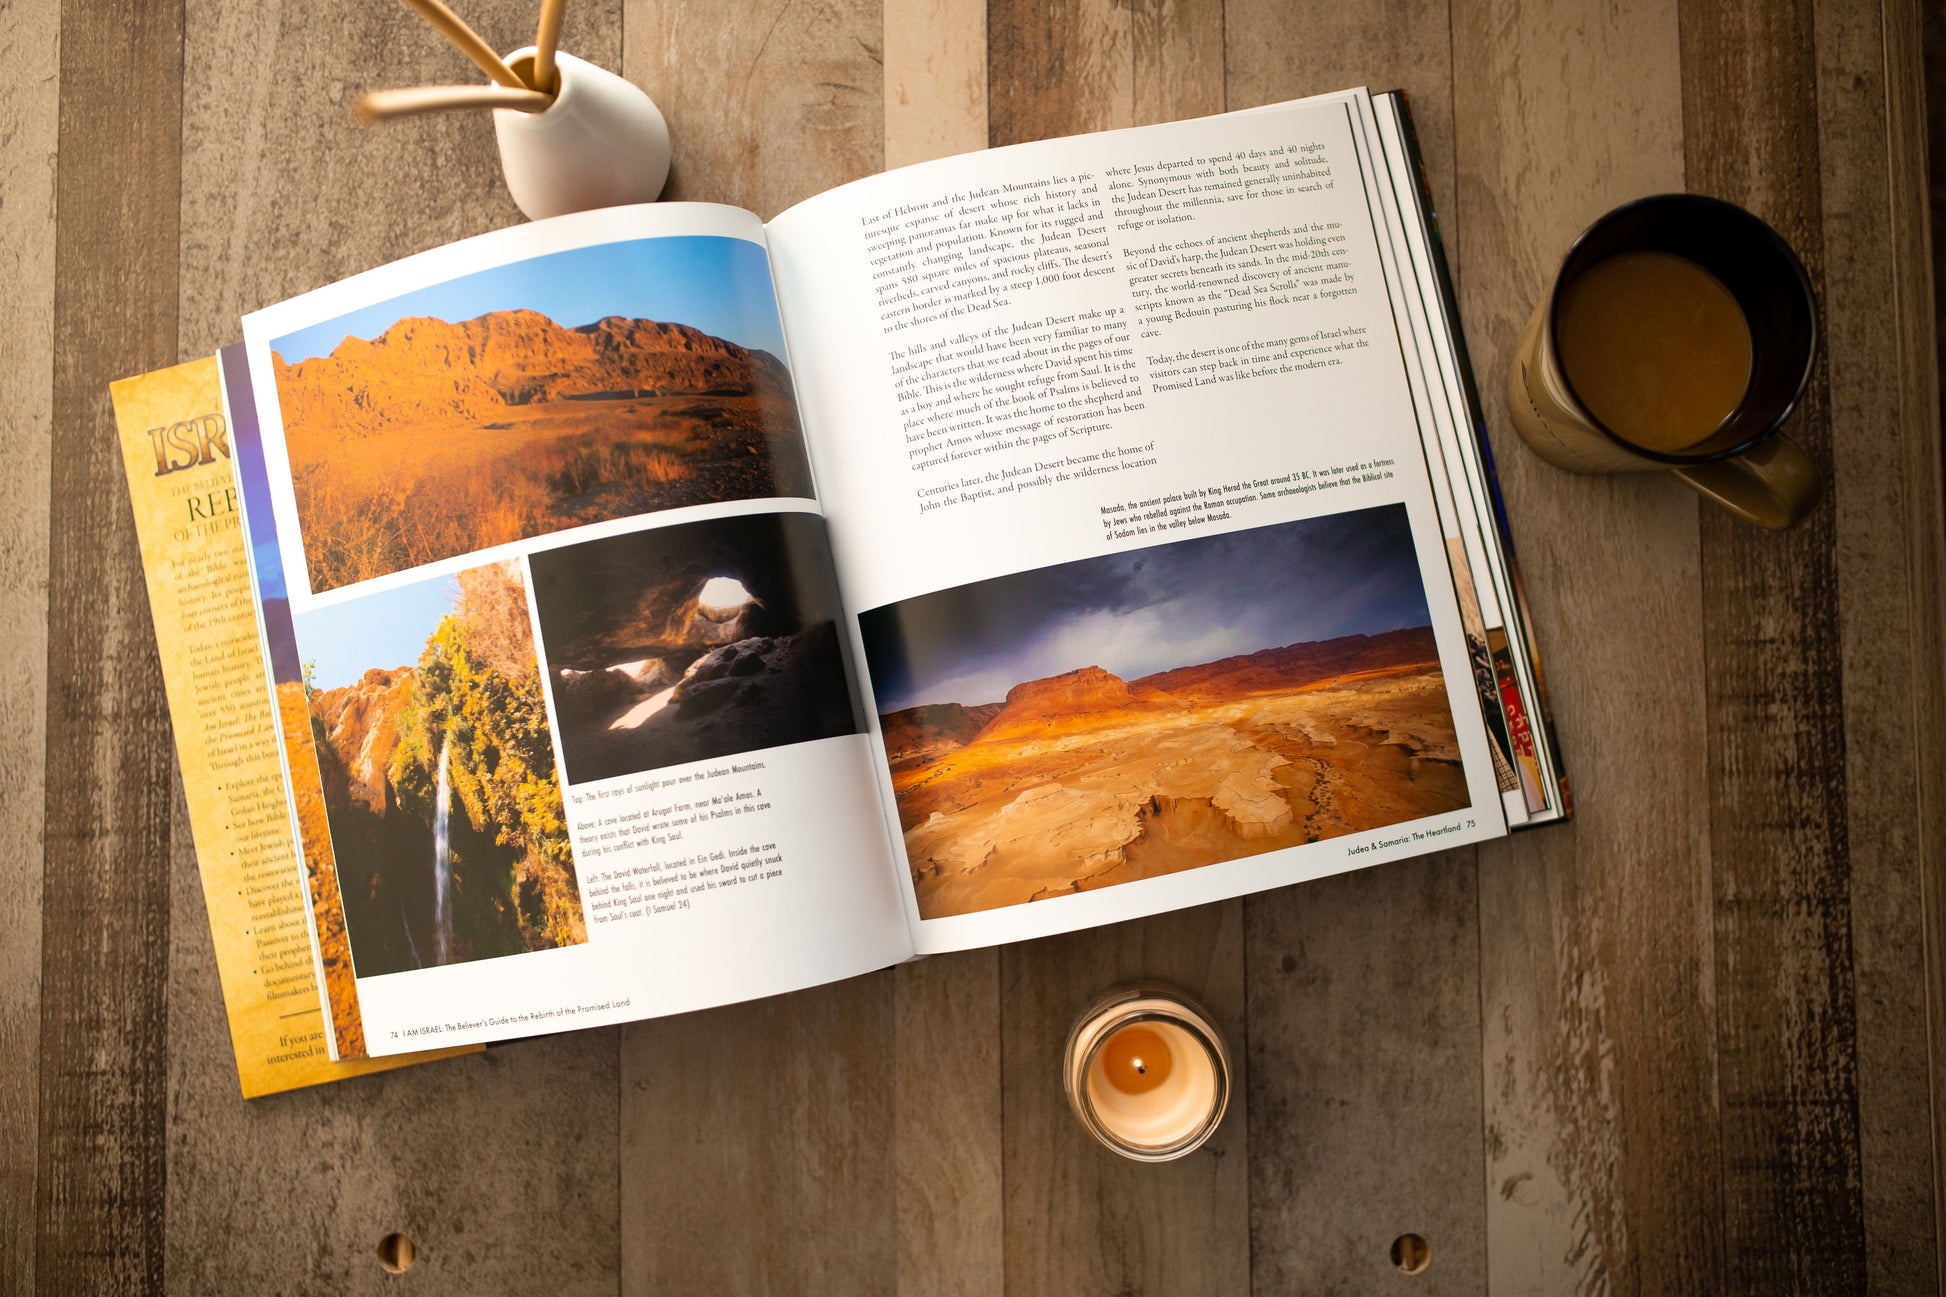 The Israel Coffee Table Photobook: Most exceptional photography of Israel's  famous sceneries (Israel & Jerusalem Photobooks): Bar, Eitan:  9798368330068: : Books